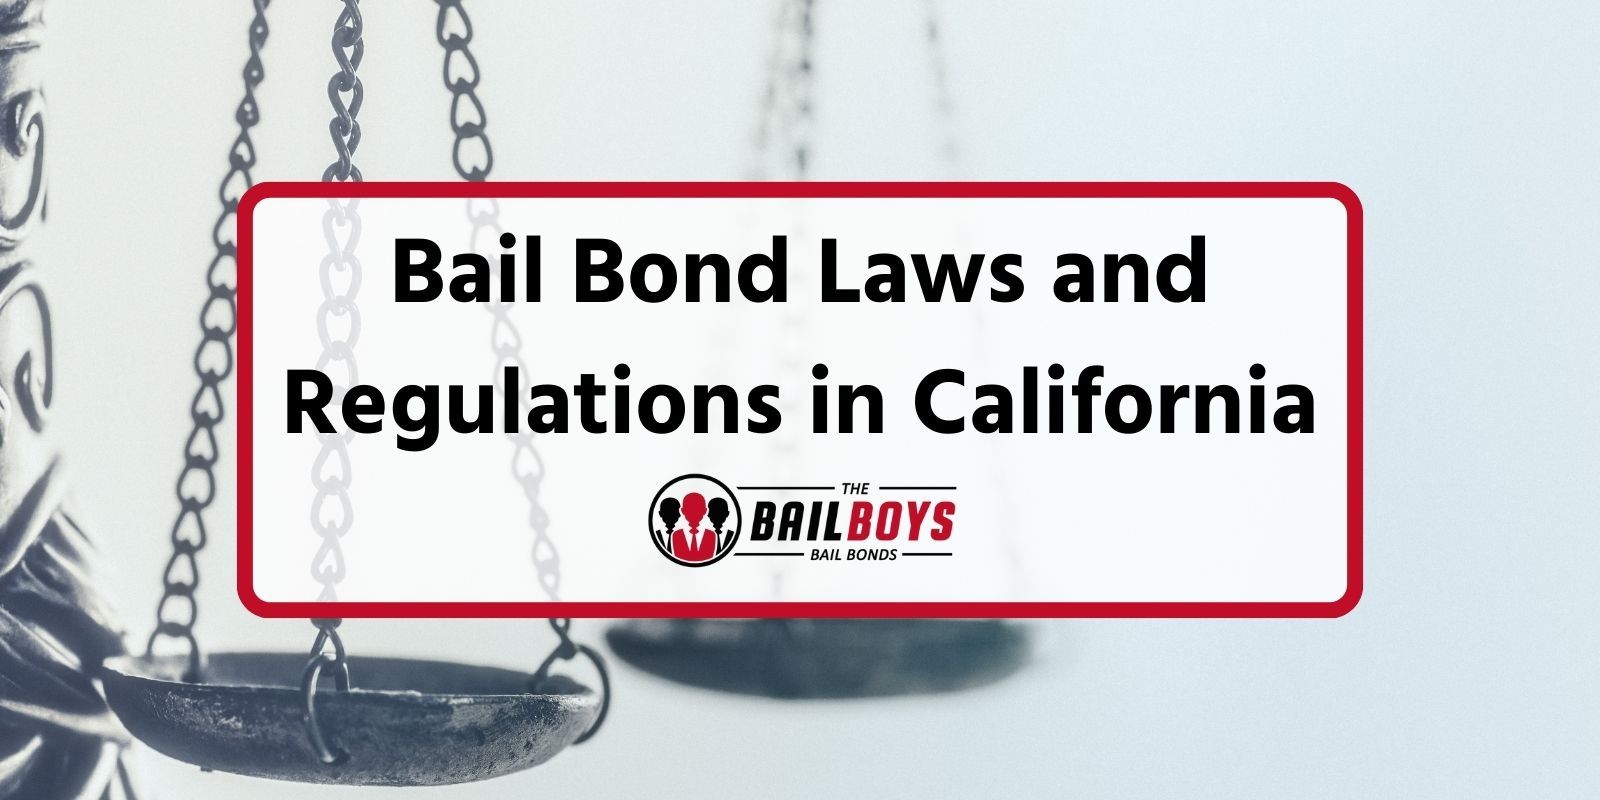 Bail Bond Laws and Regulations in California